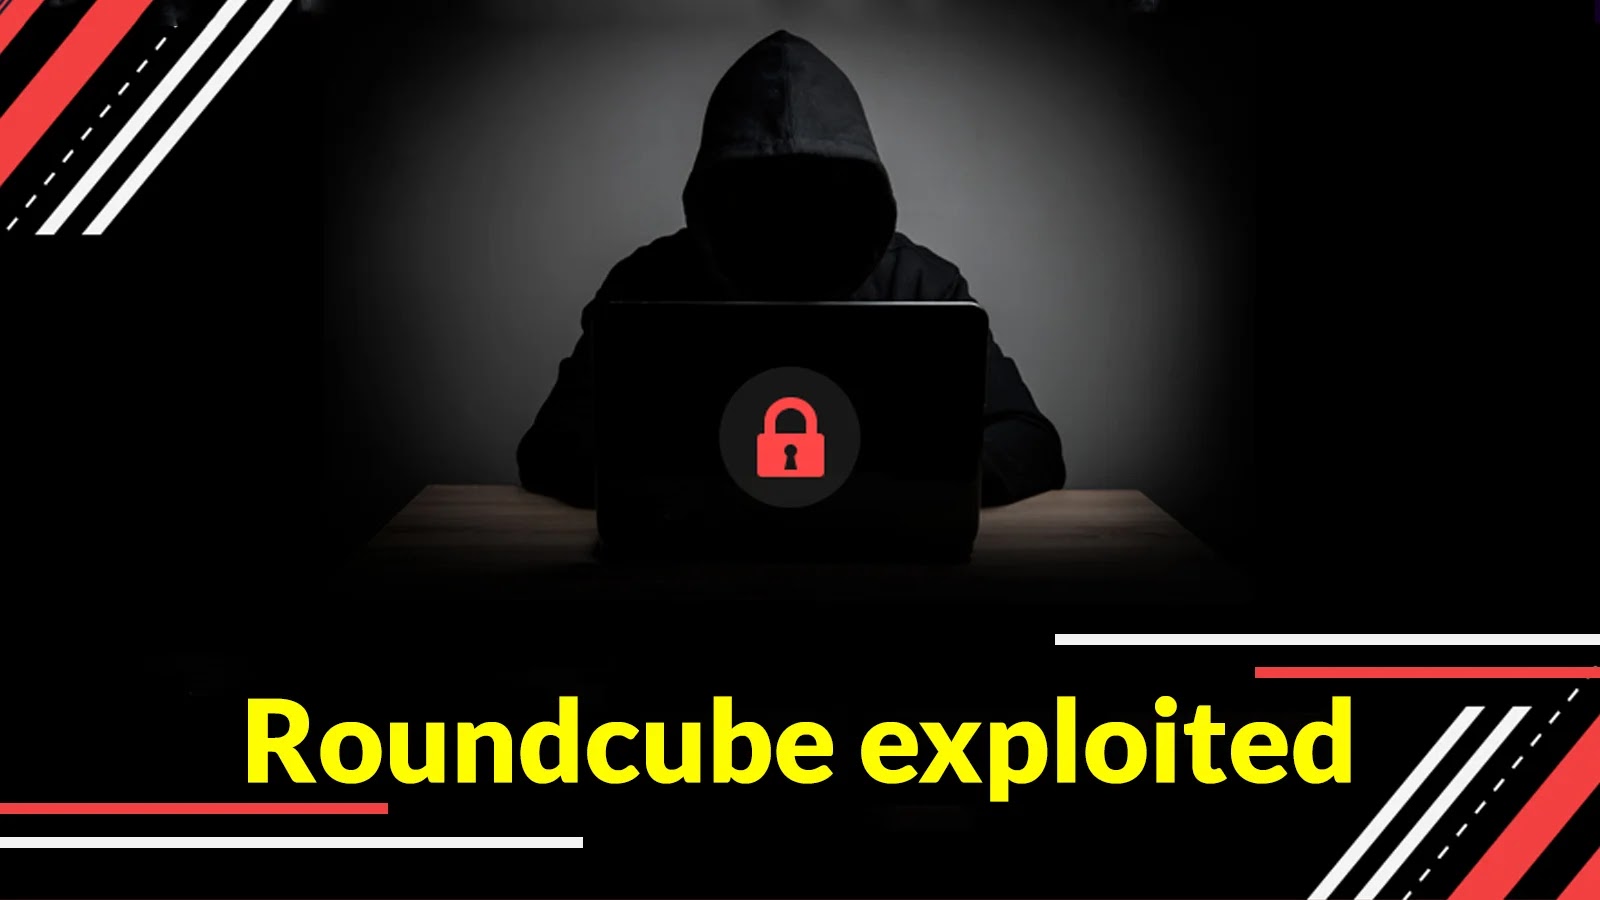 Hackers compromised the Roundcube Email Servers of Ukrainian organizations